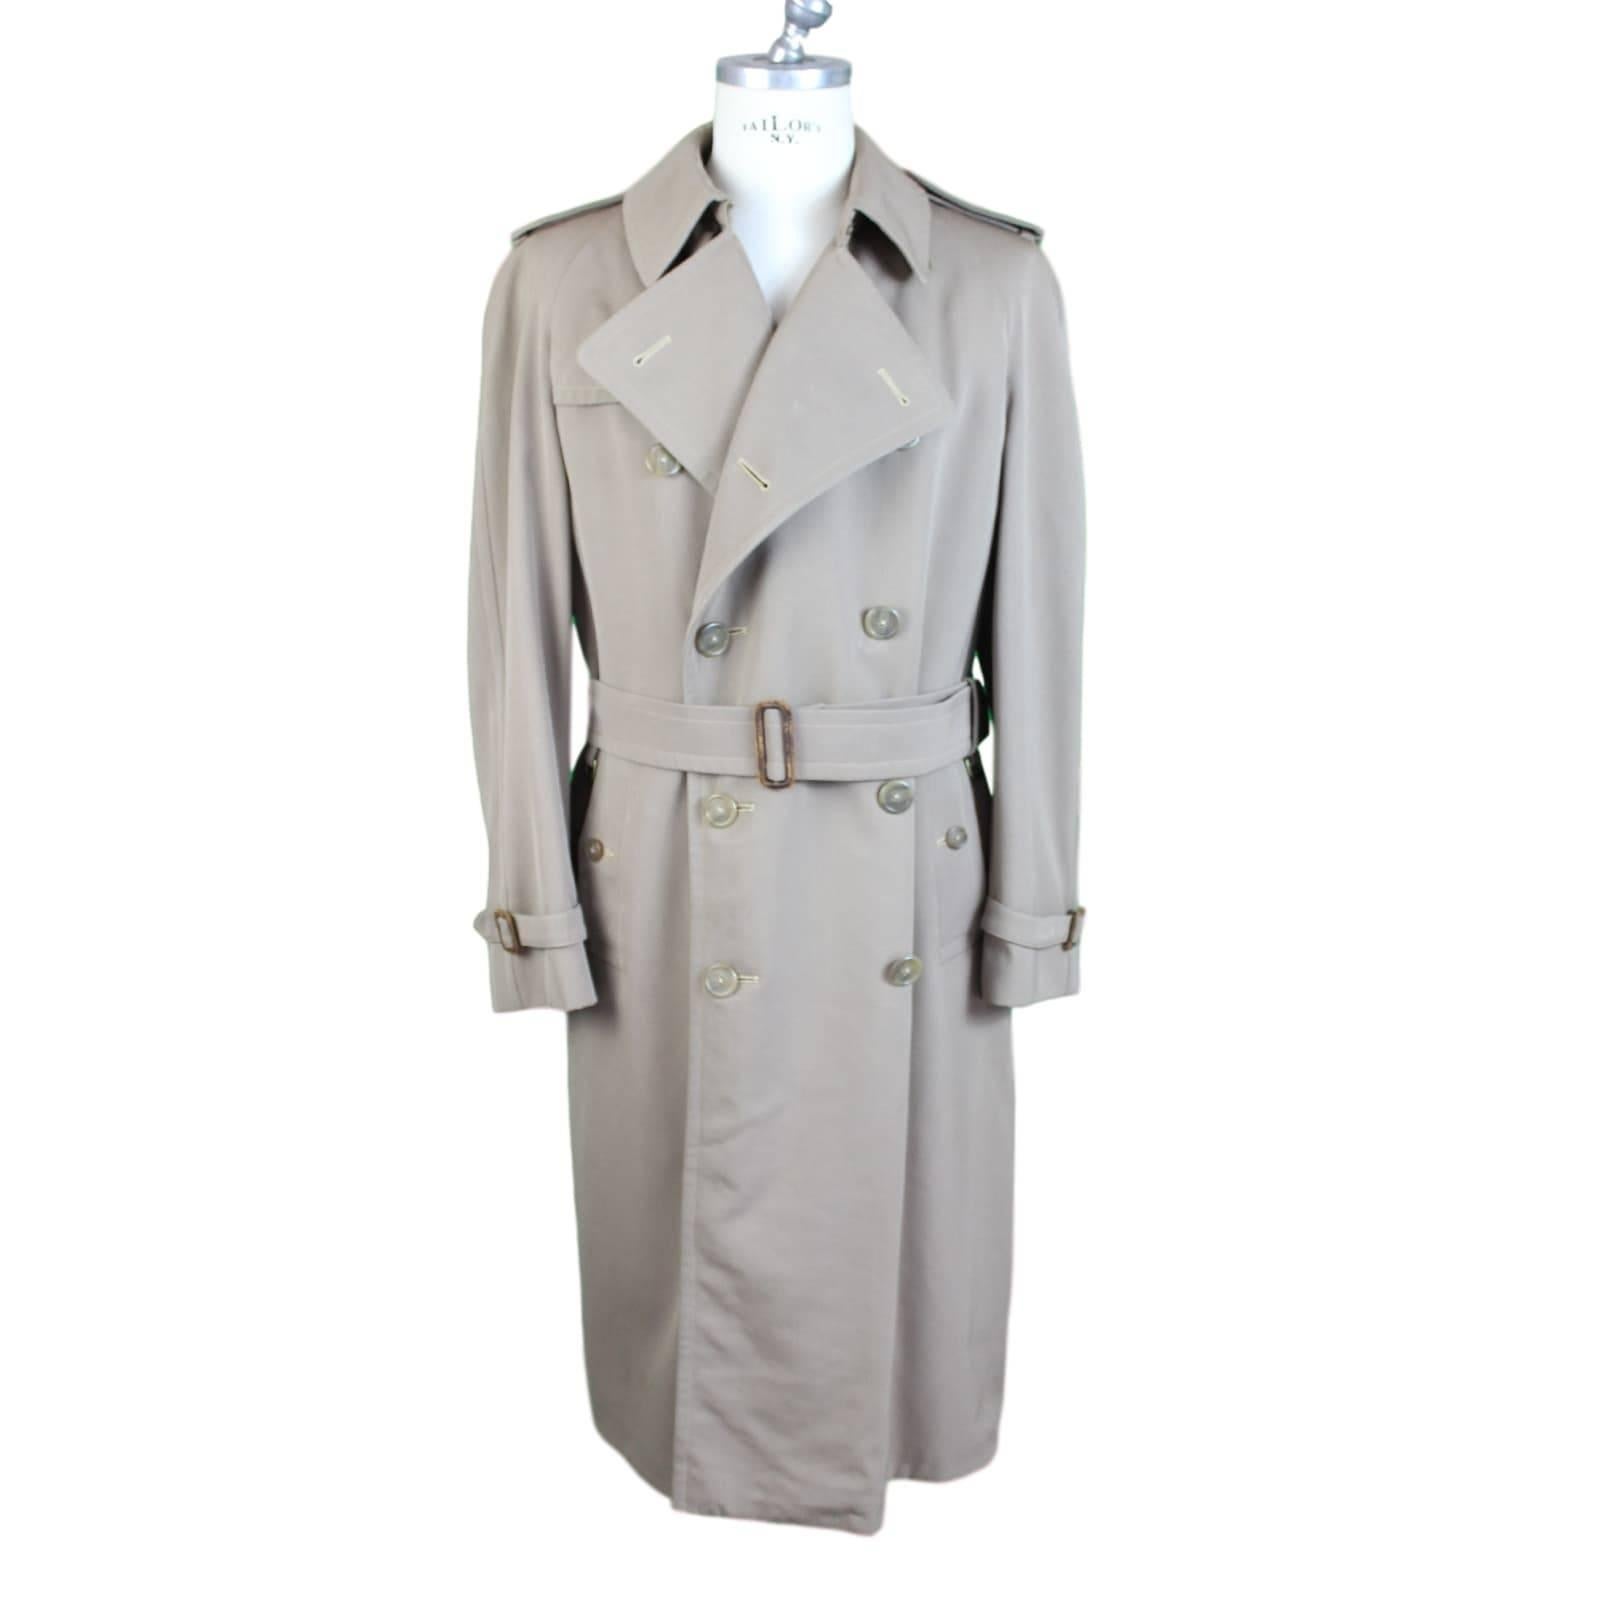 Authentic vintage Burberry trench coat, waterproof. Perfect, the details of leather belts, they usually become damaged in the time, however these are in excellent condition.

Size: 38 reg. (UK) = 48 (IT)

Measures:

Shoulders: 52 cm
Armpit to